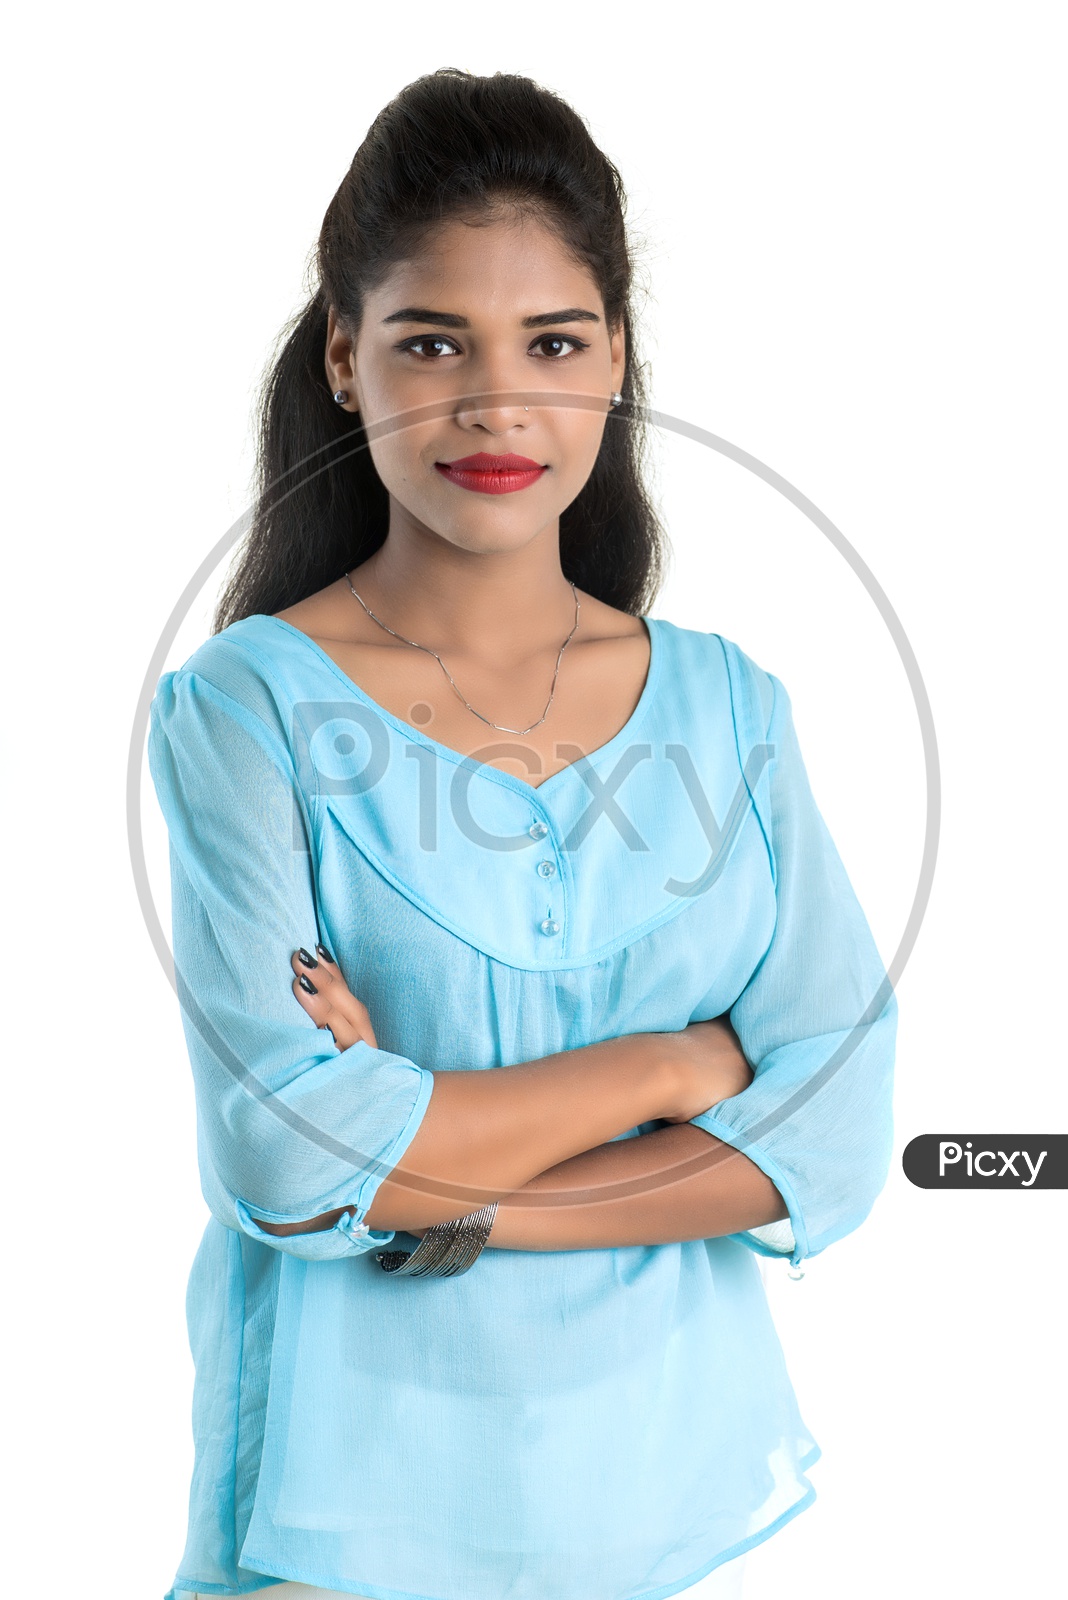 Portrait Of a Young Indian Girl With a Smile Face and Posing On an Isolated White Background